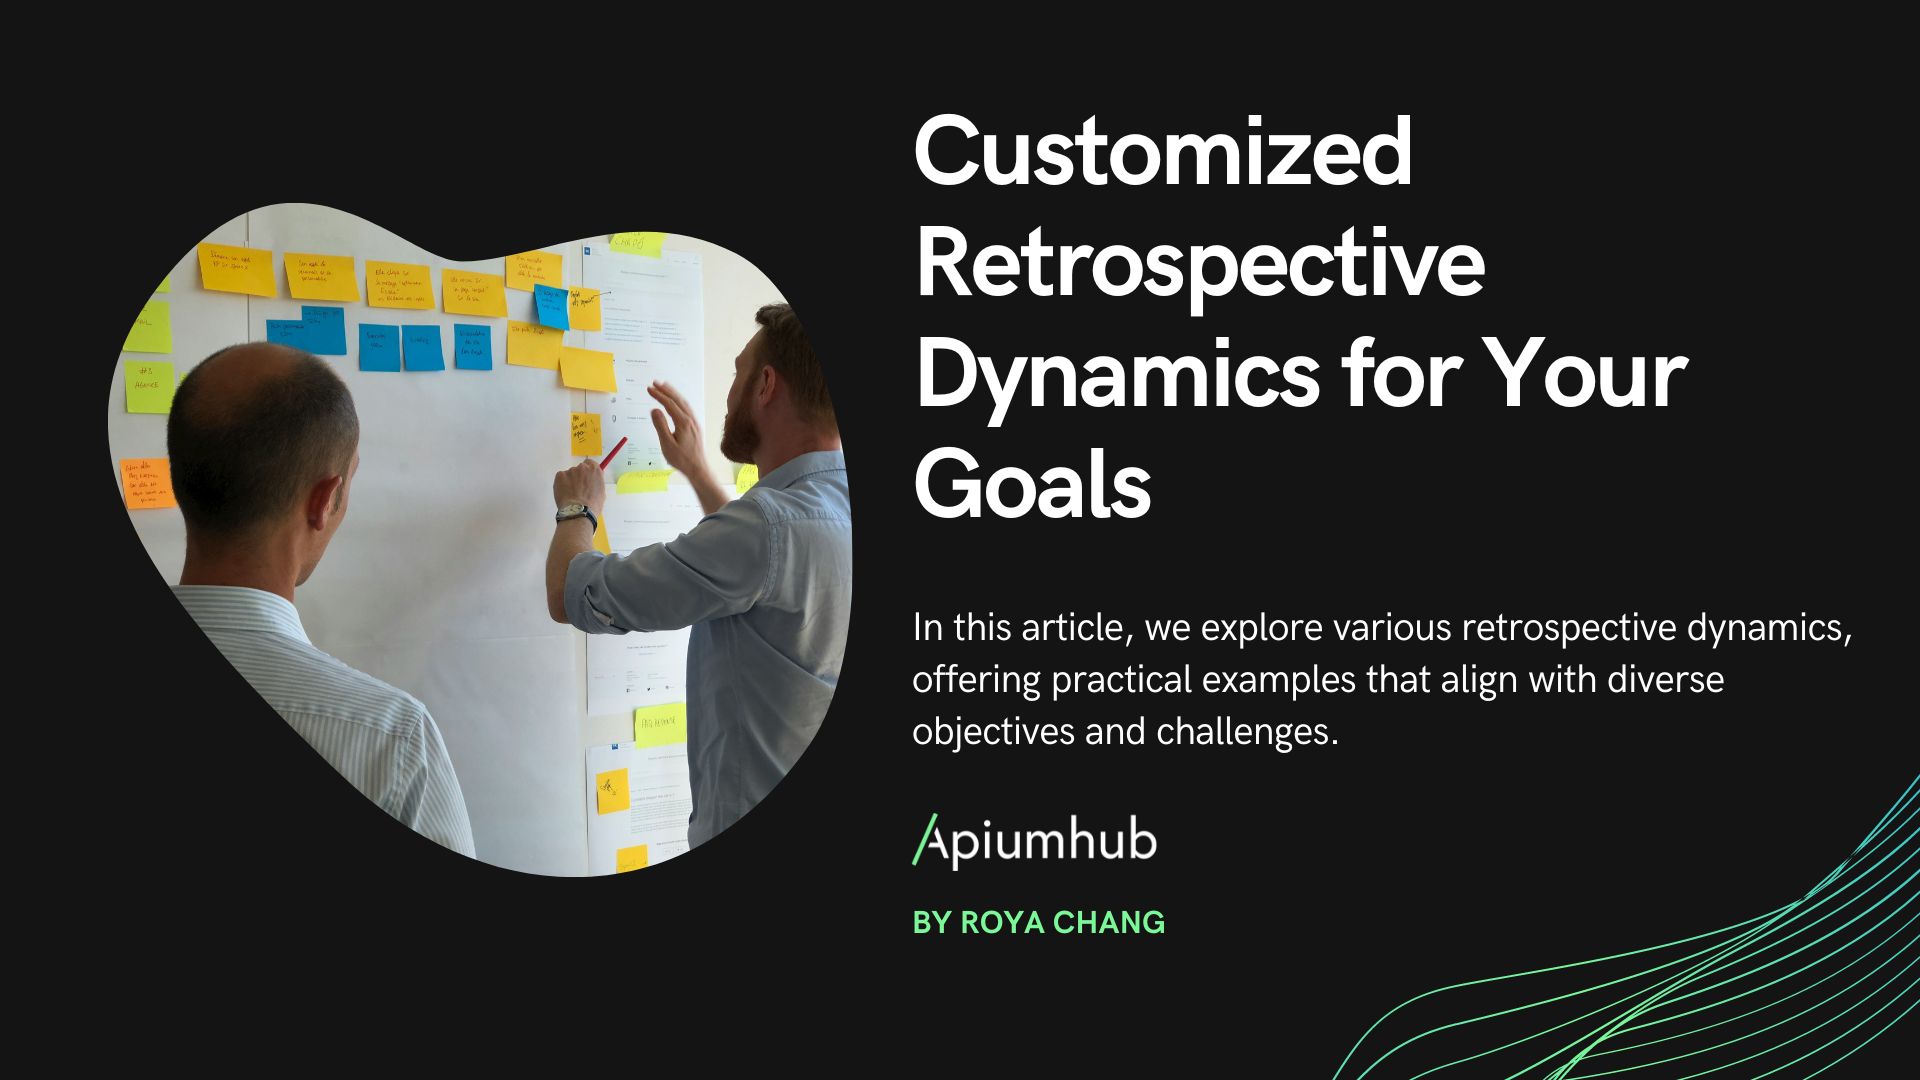 Customized retrospective dynamics for your goals